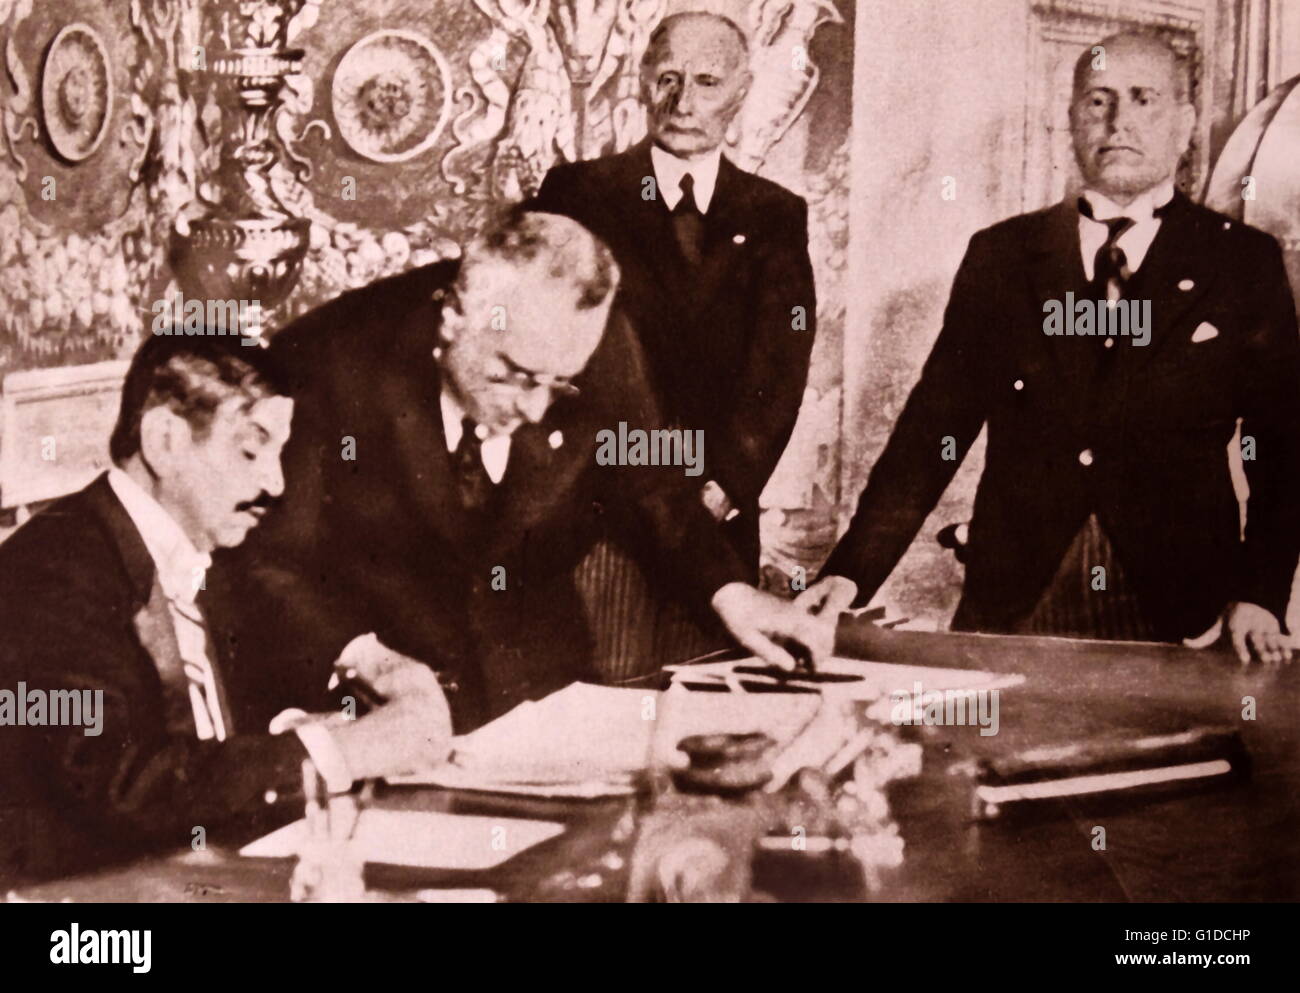 Italian Fascist leader Mussolini (right) watches as his representative signs treaty with French Prime Minister Pierre Laval, 1936 Stock Photo